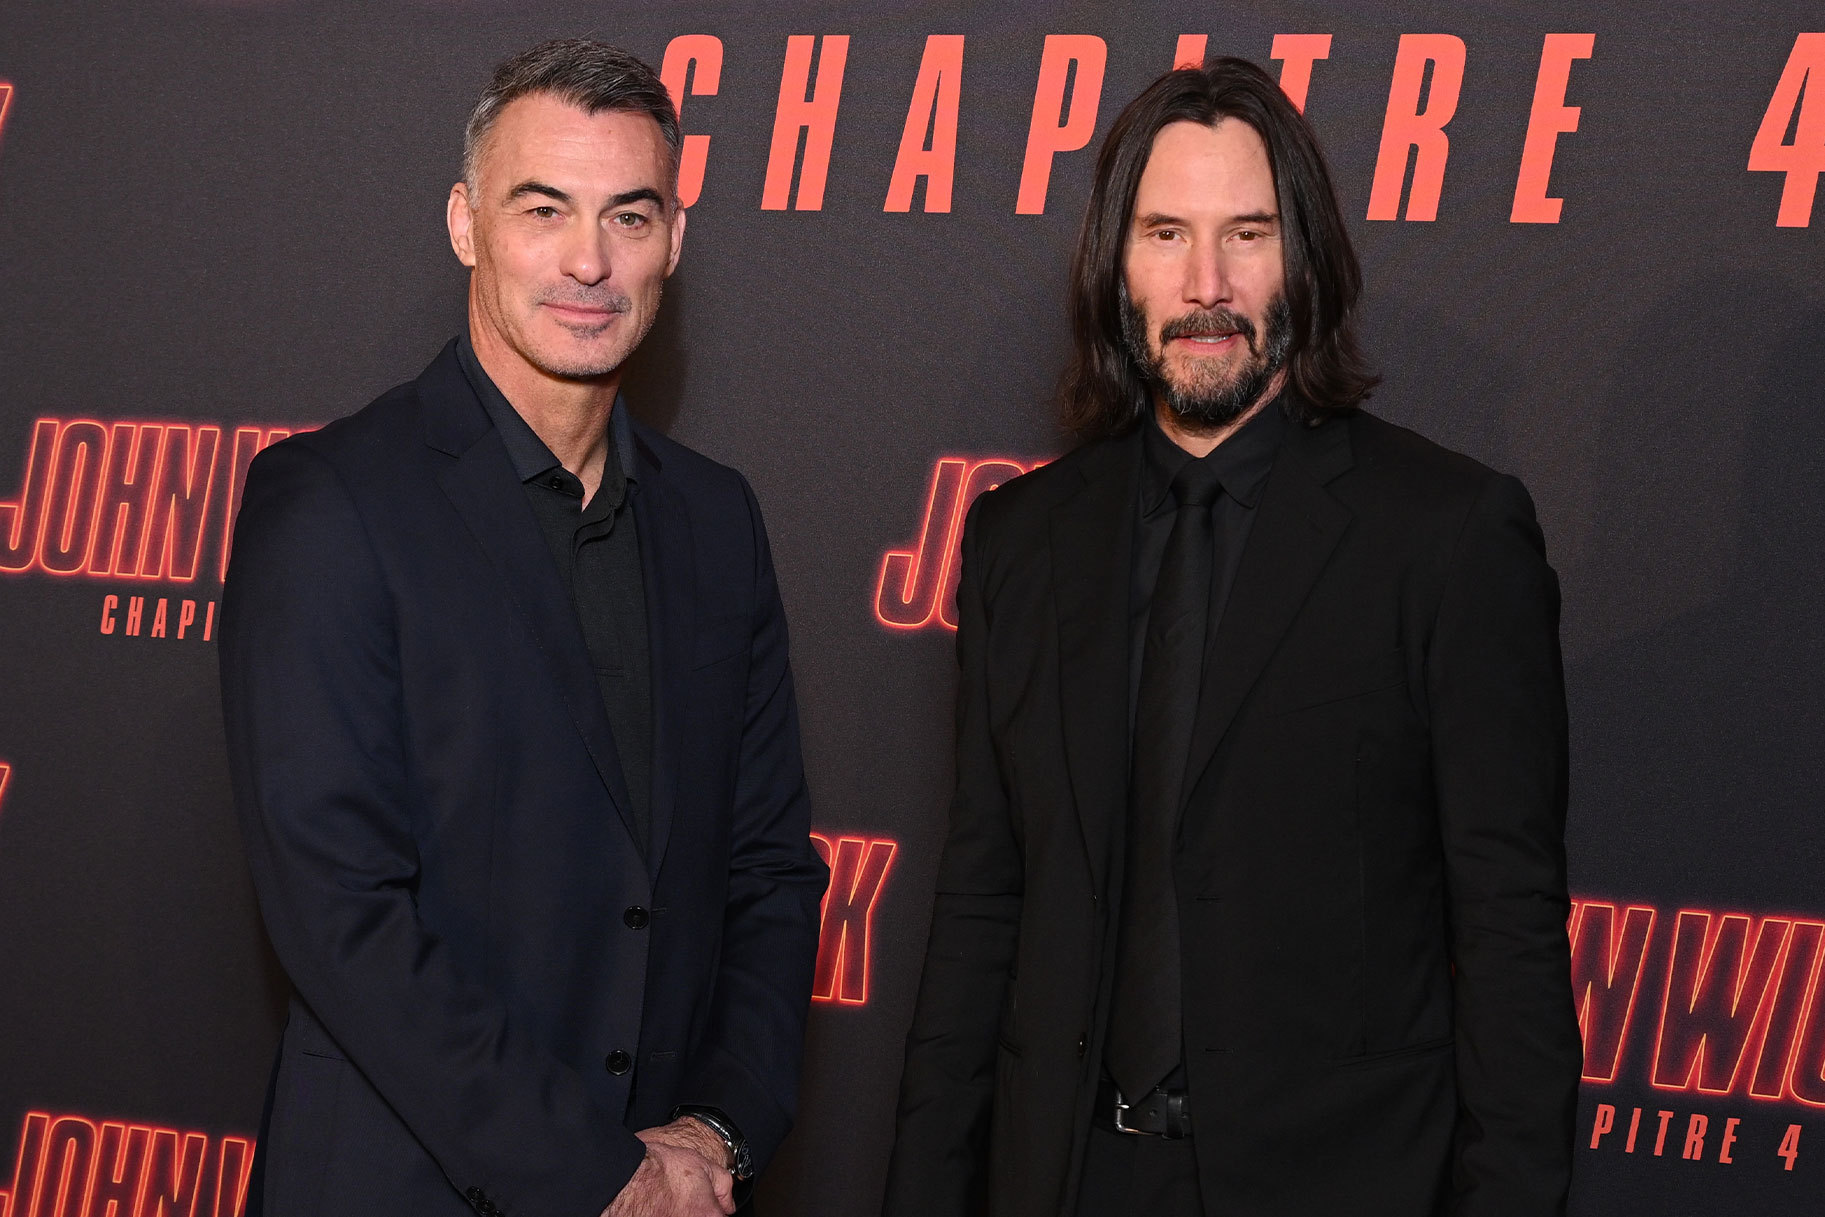 Keanu Reeves and Chad Stahelski at the premiere of 'John Wick 4'